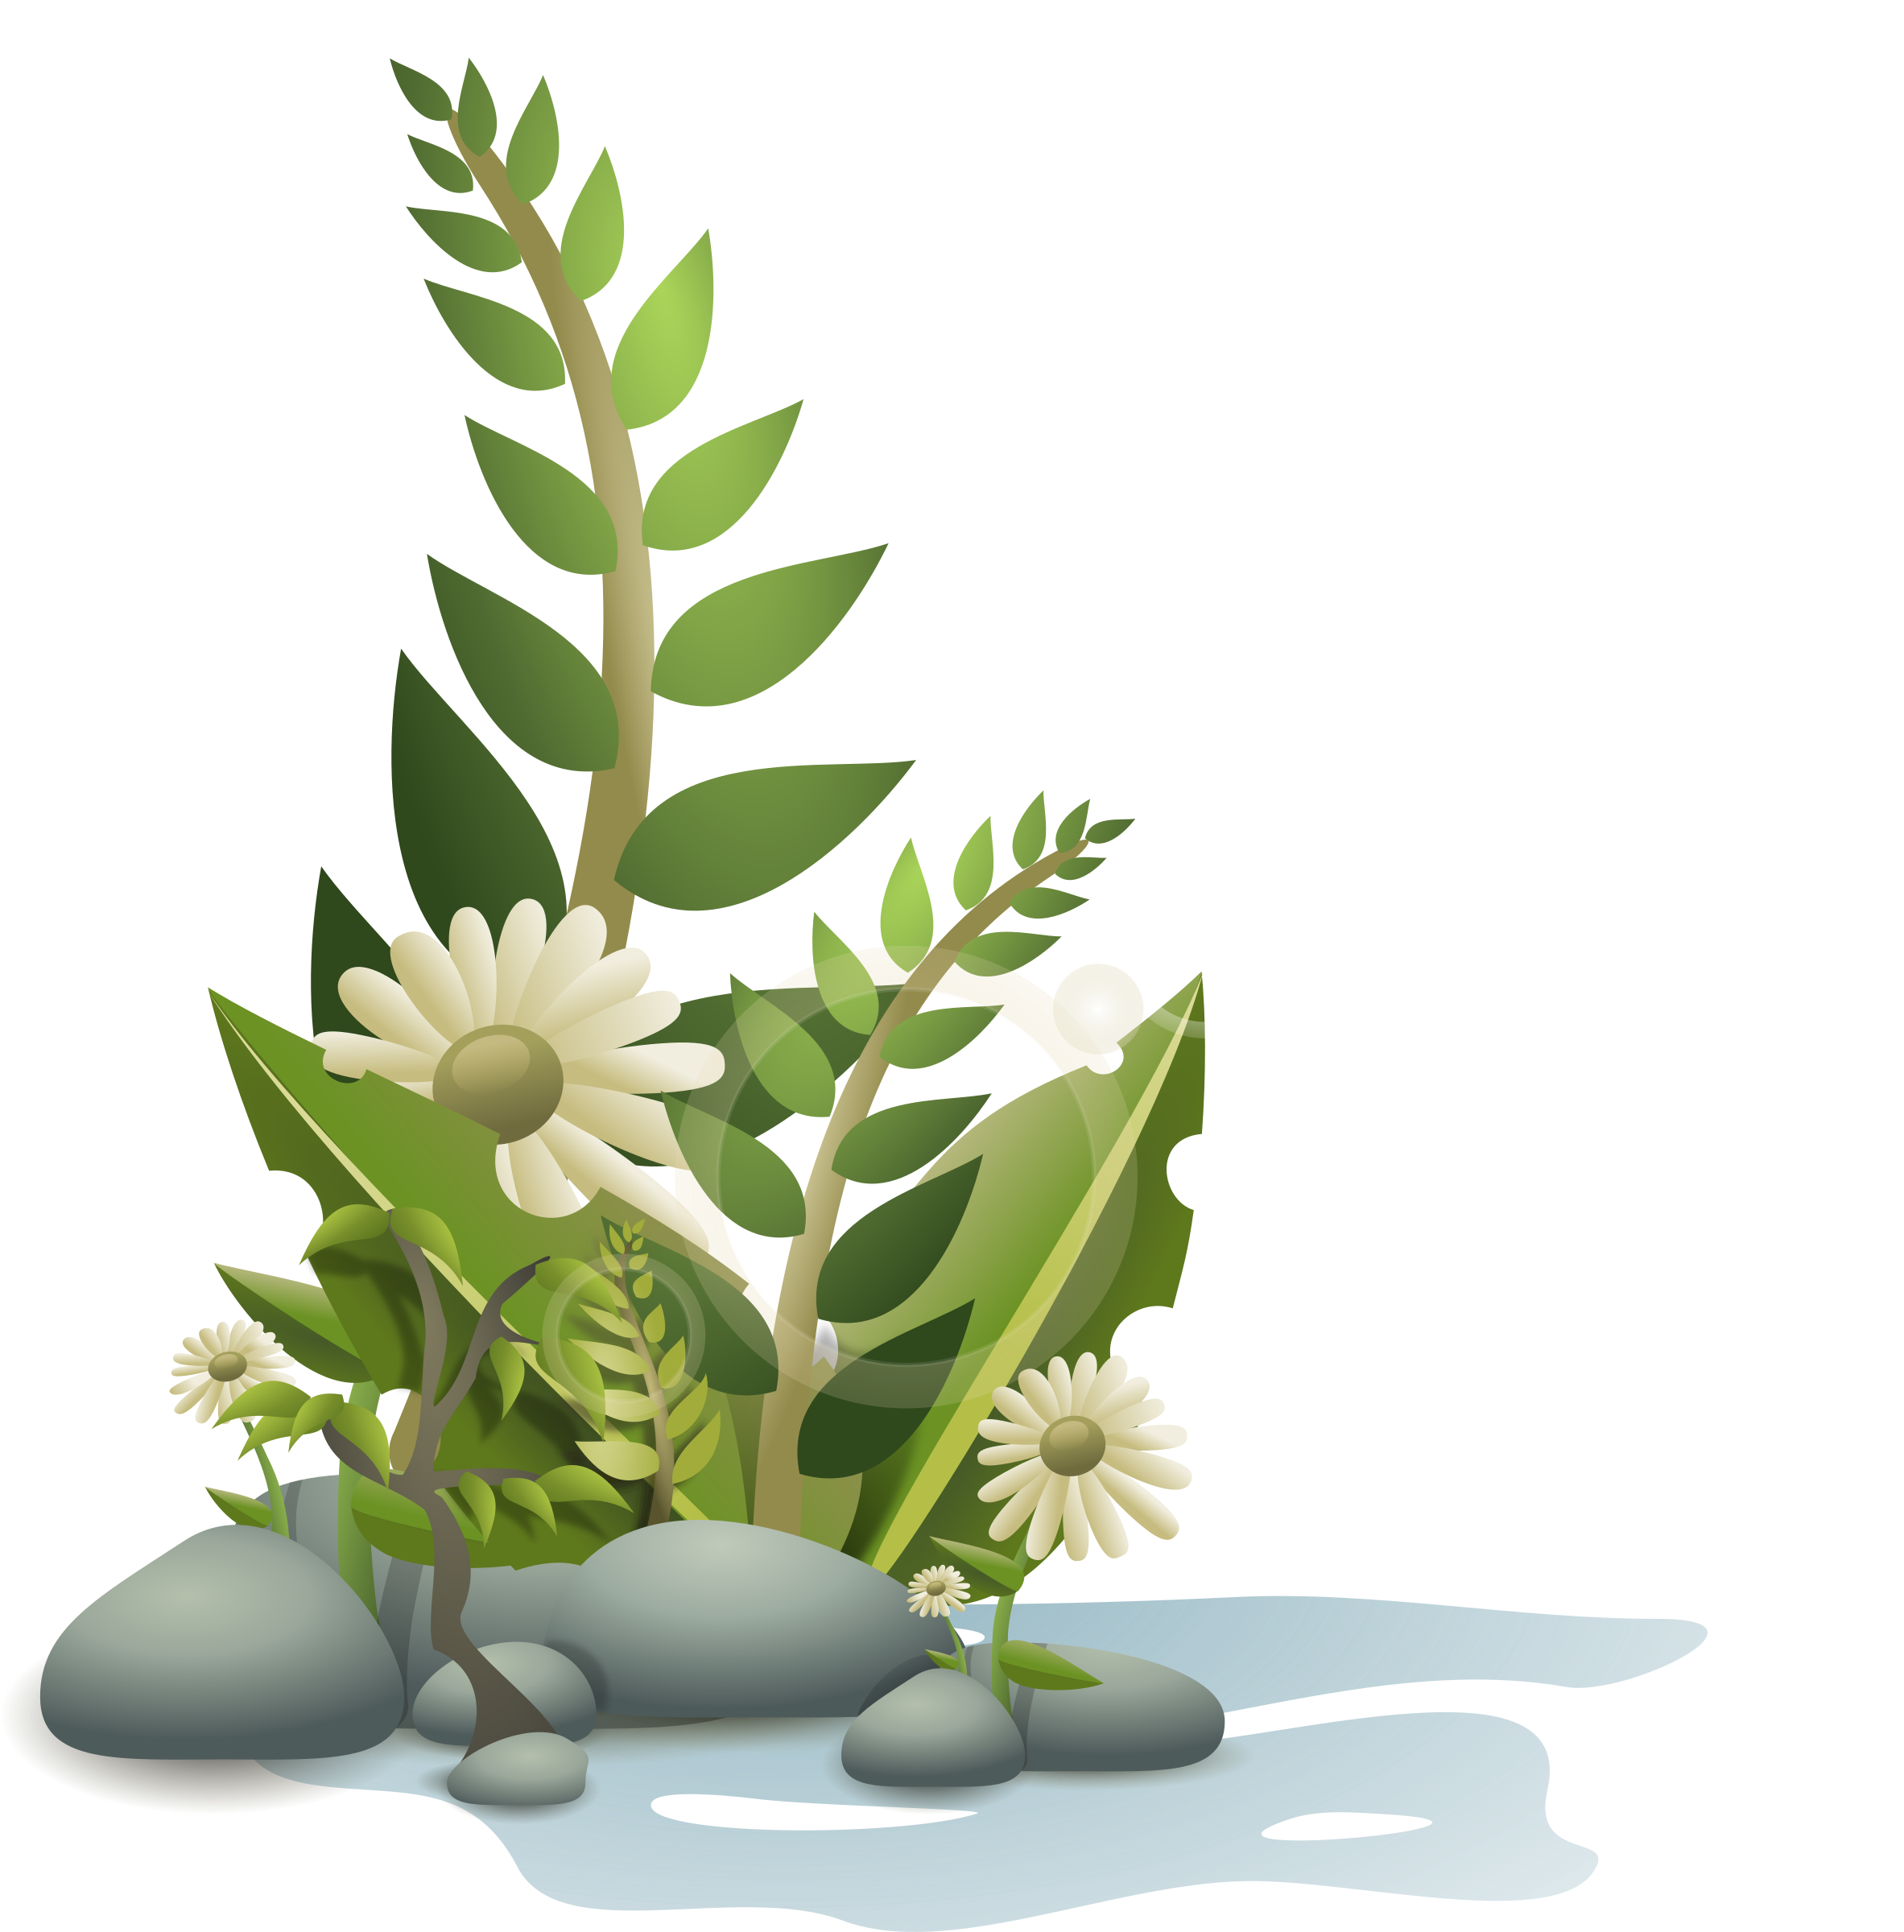 Plants pebbles and flowers. Lily clipart funeral flower